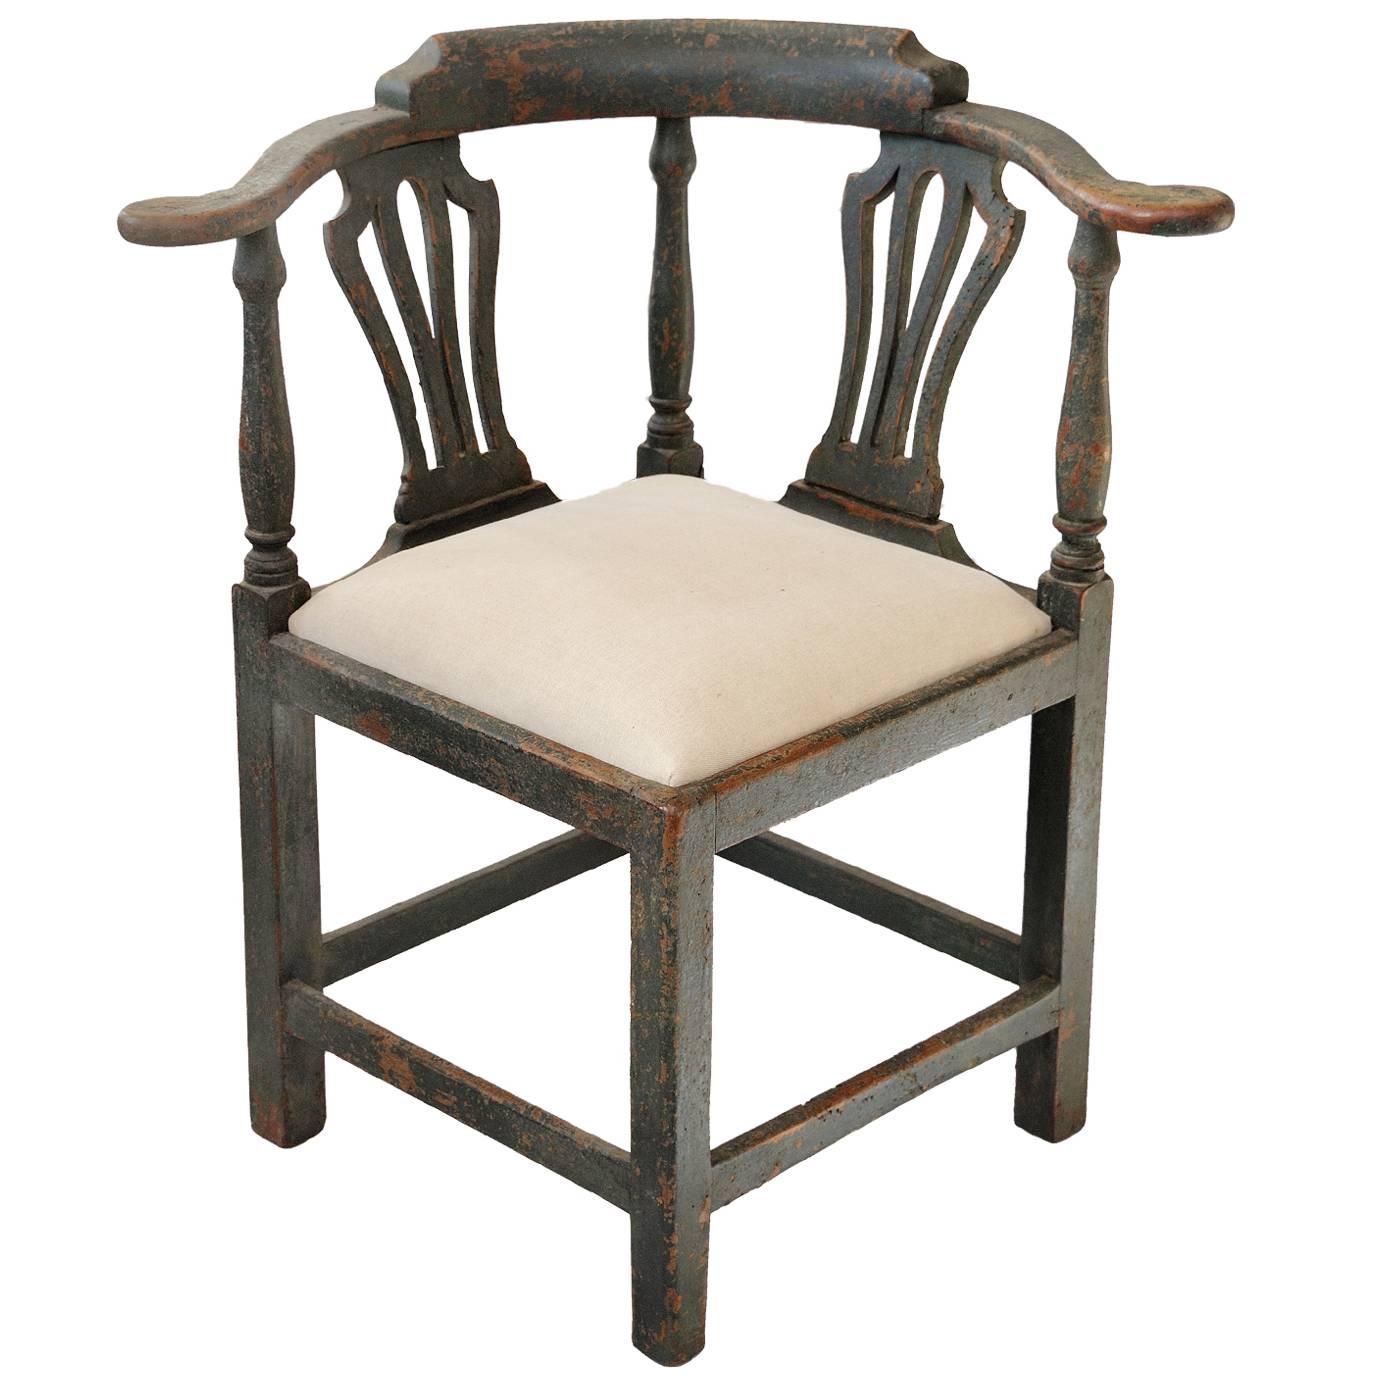 English George III Painted Elm Mid-18th Century Corner or Desk Chair, circa 1760 For Sale